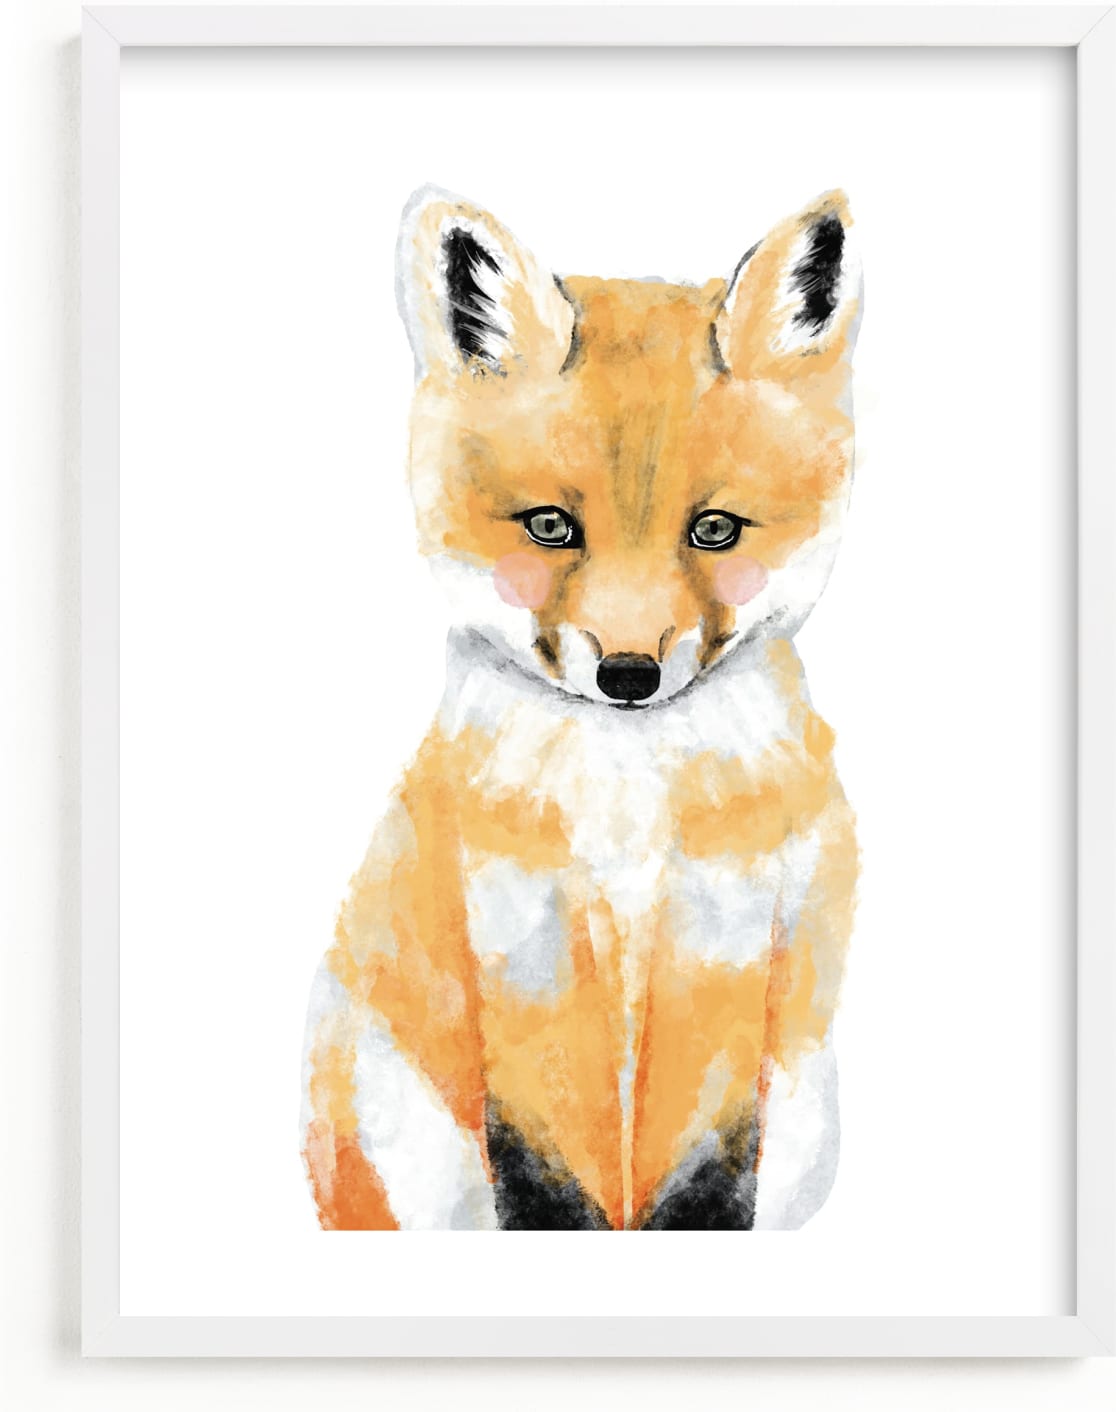 This is a grey kids wall art by Cass Loh called Baby Animal.Fox.